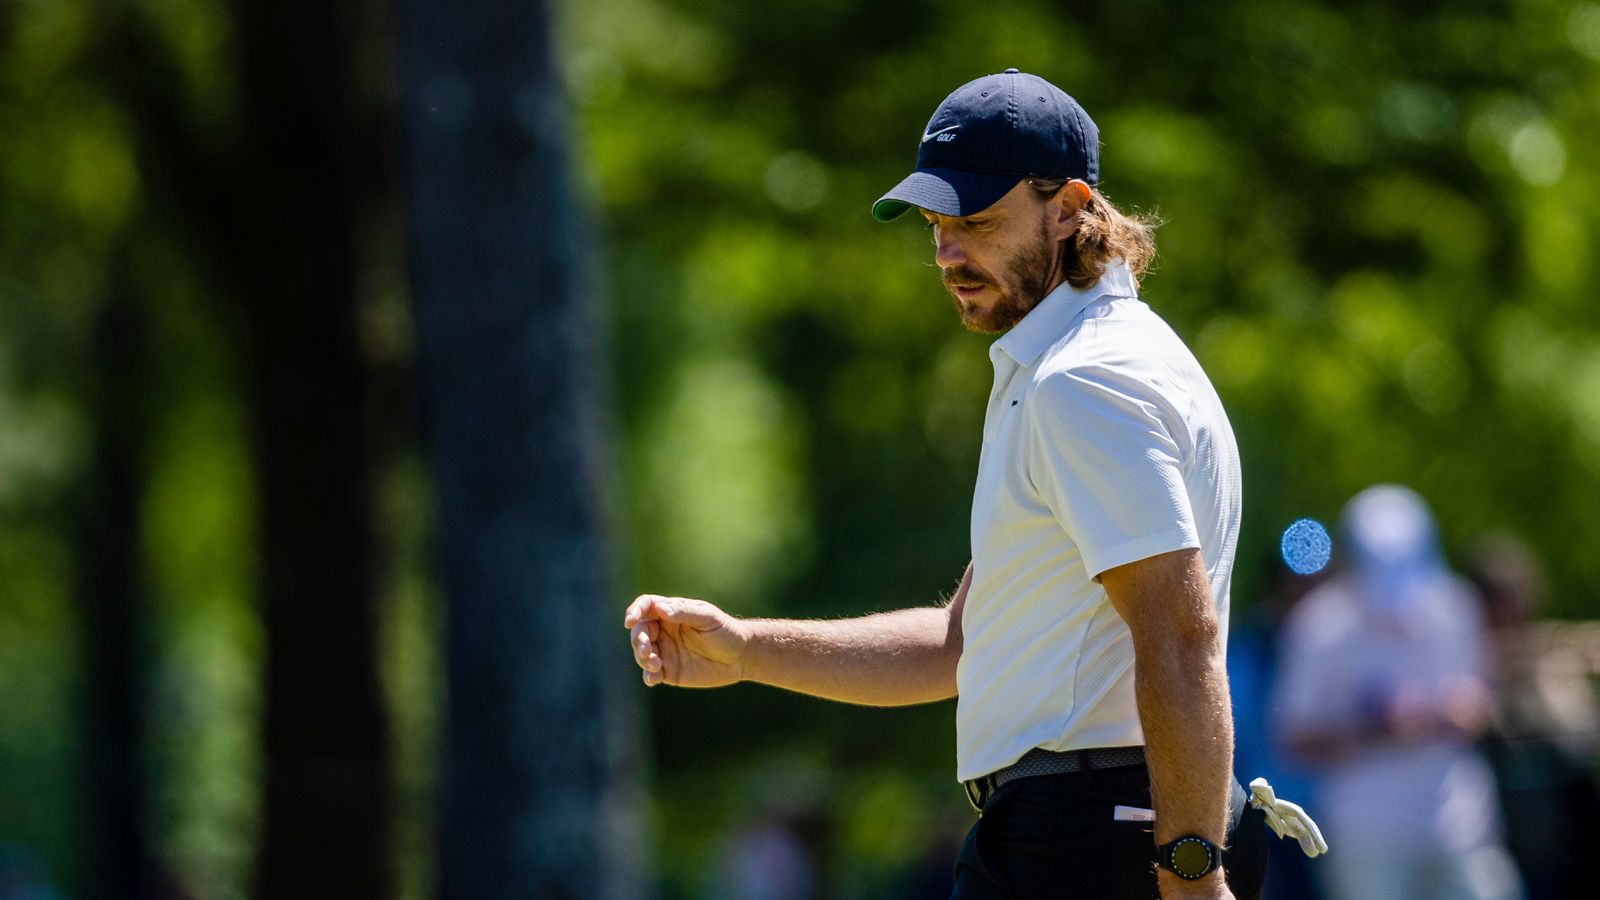 PGA Tour: Tommy Fleetwood ahead at Wells Fargo Championship with Rory McIlroy in contention